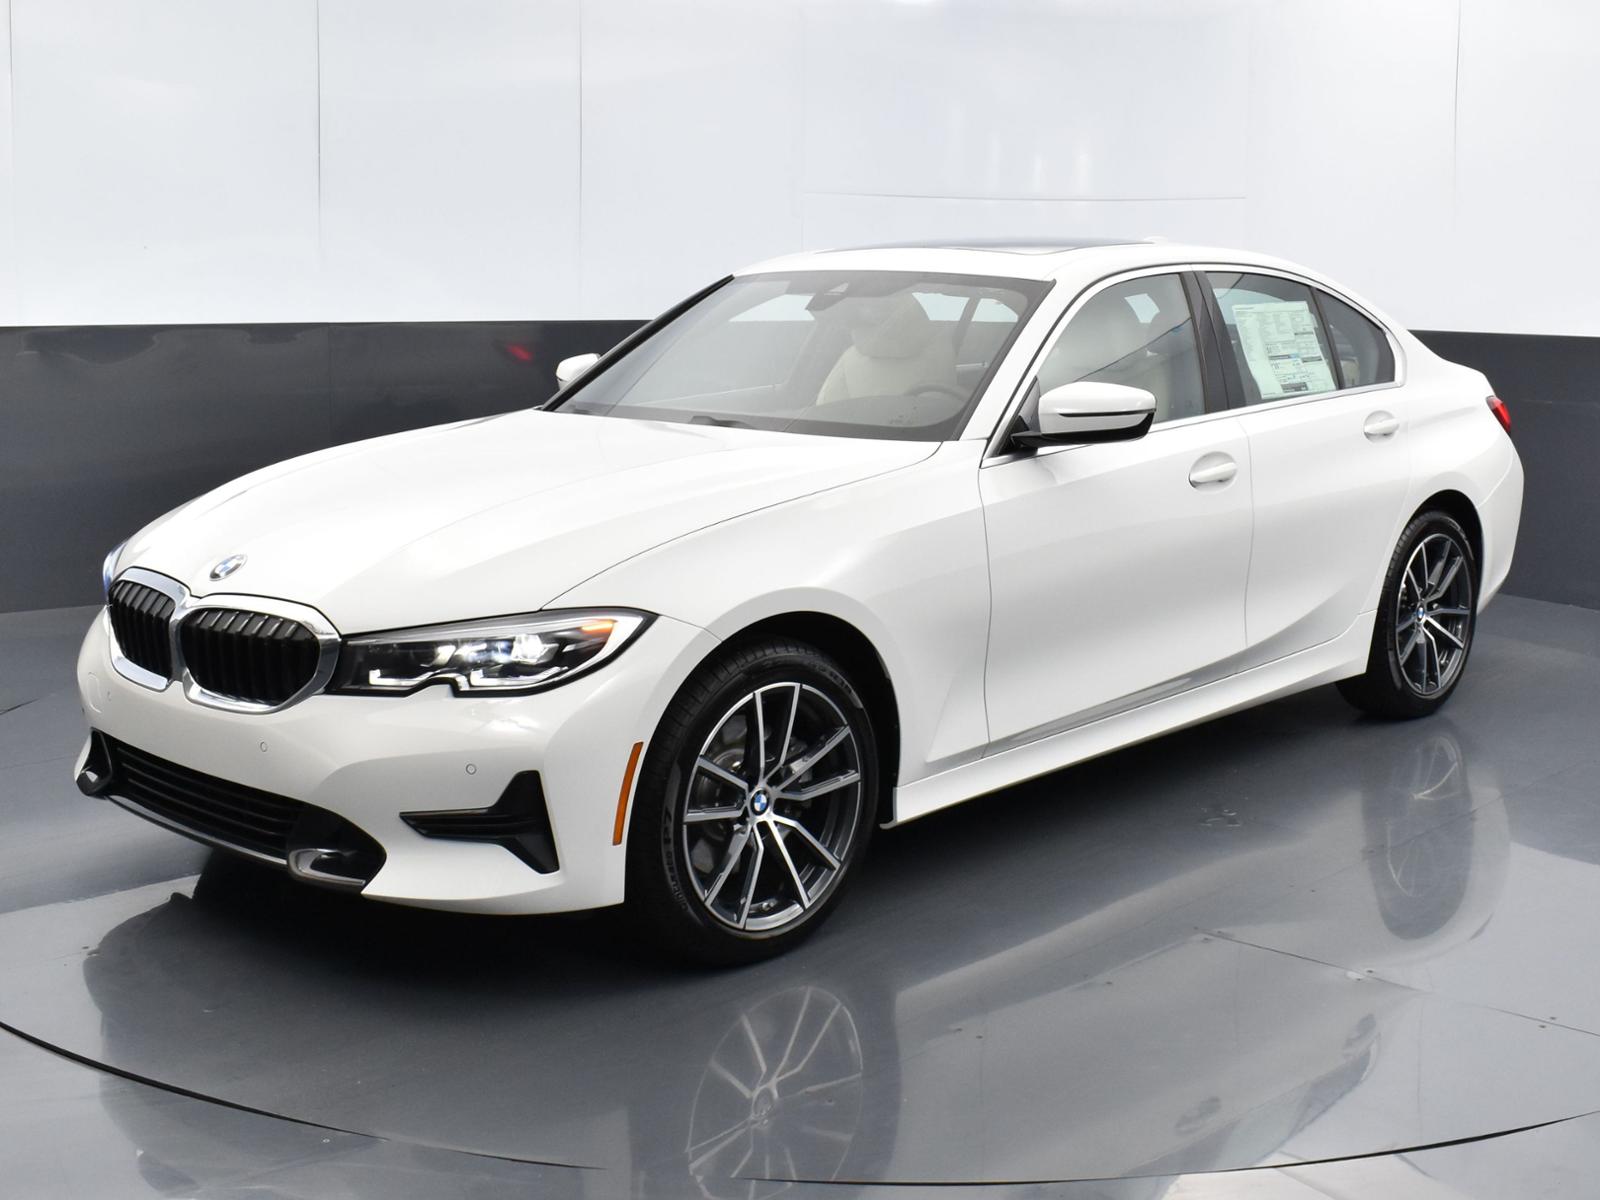 New 2022 BMW 3 Series 330i Sedan North America 4dr Car in Beaumont  #N8C27395 | BMW of Beaumont